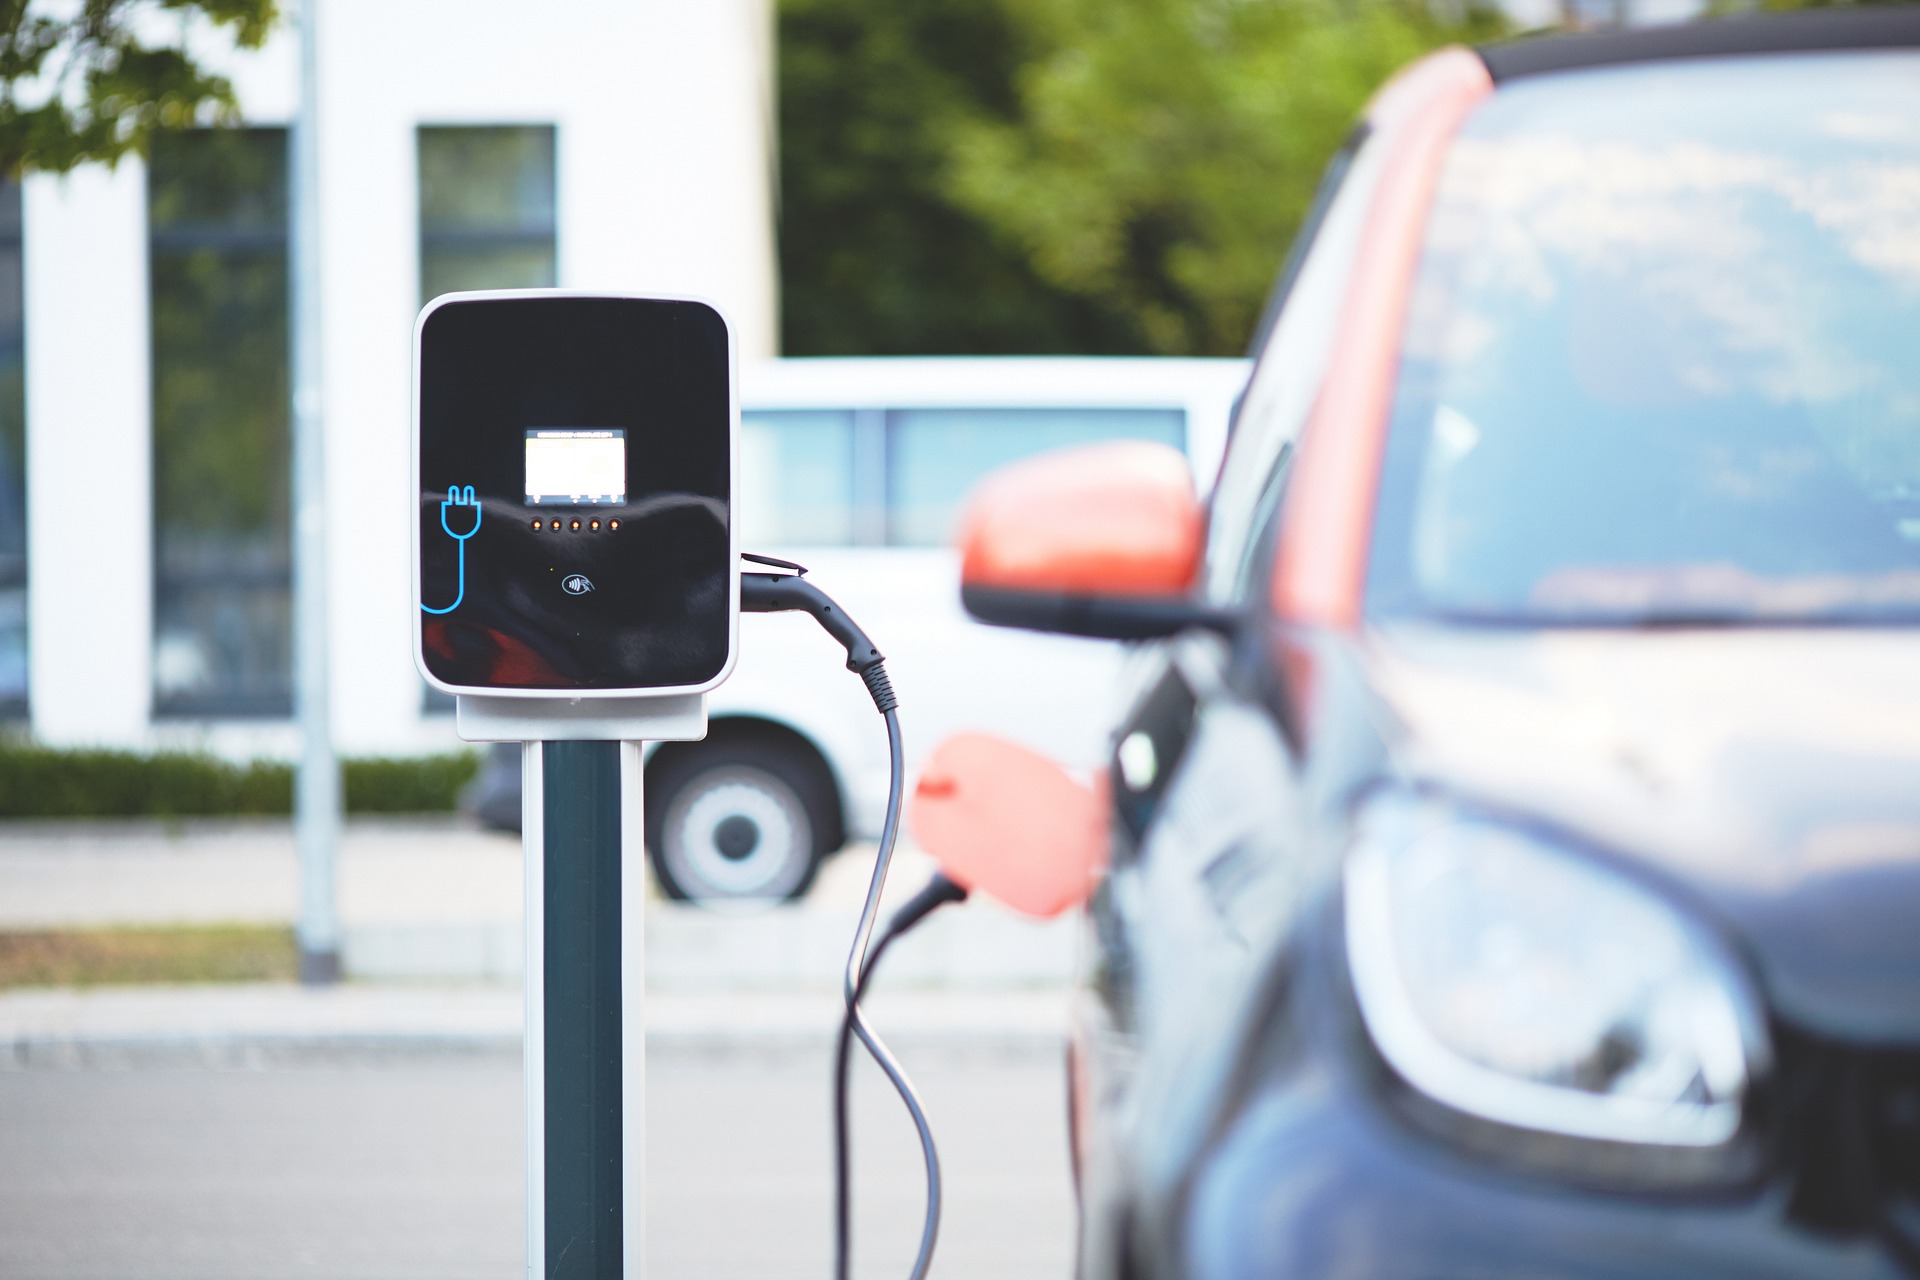 Public rapid electric vehicle charging costs rise 42% in four months